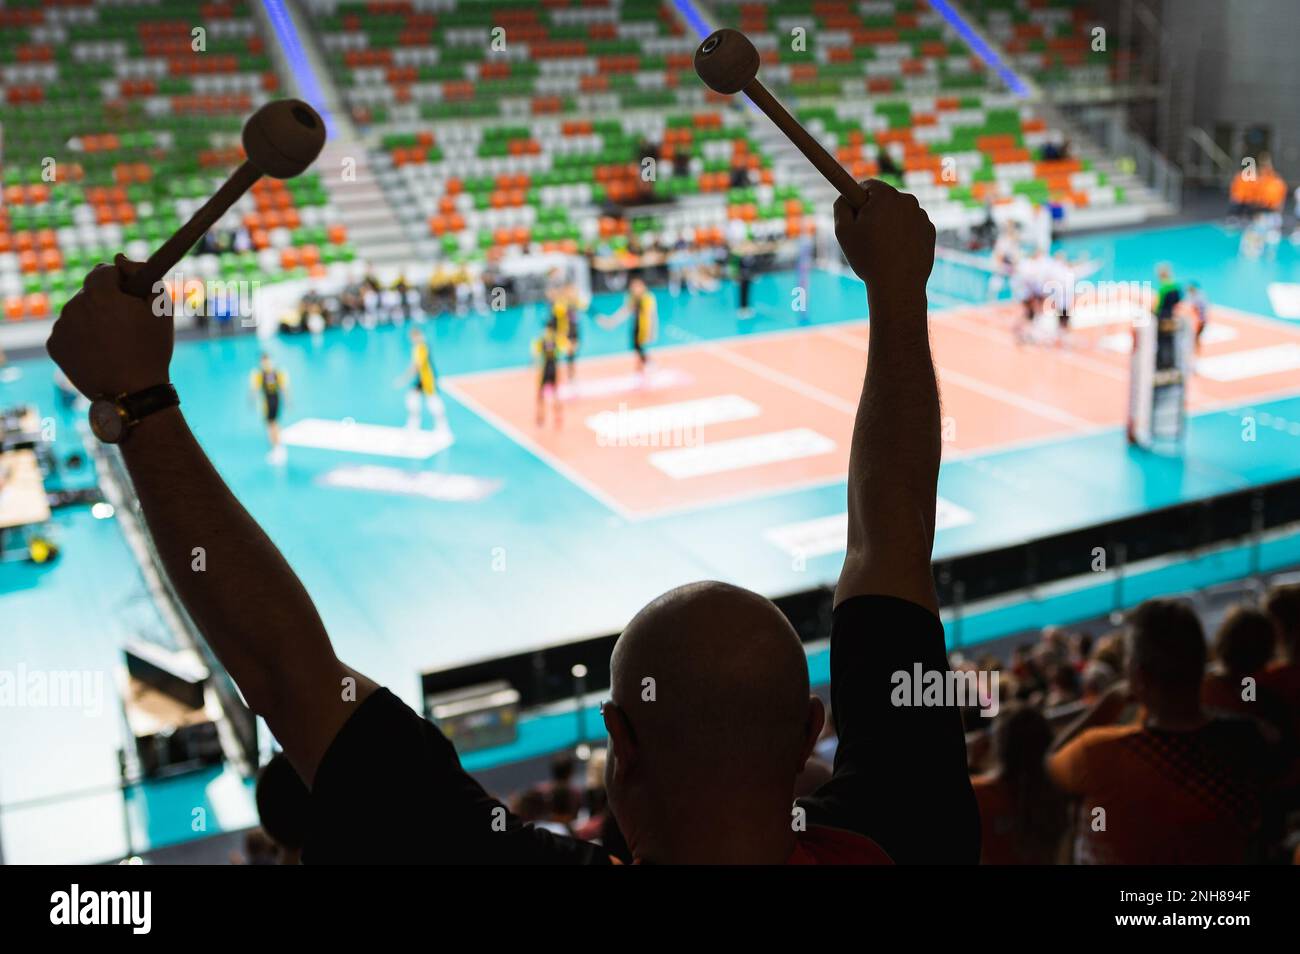 The drummer's cheering during a volleyball match Stock Photo